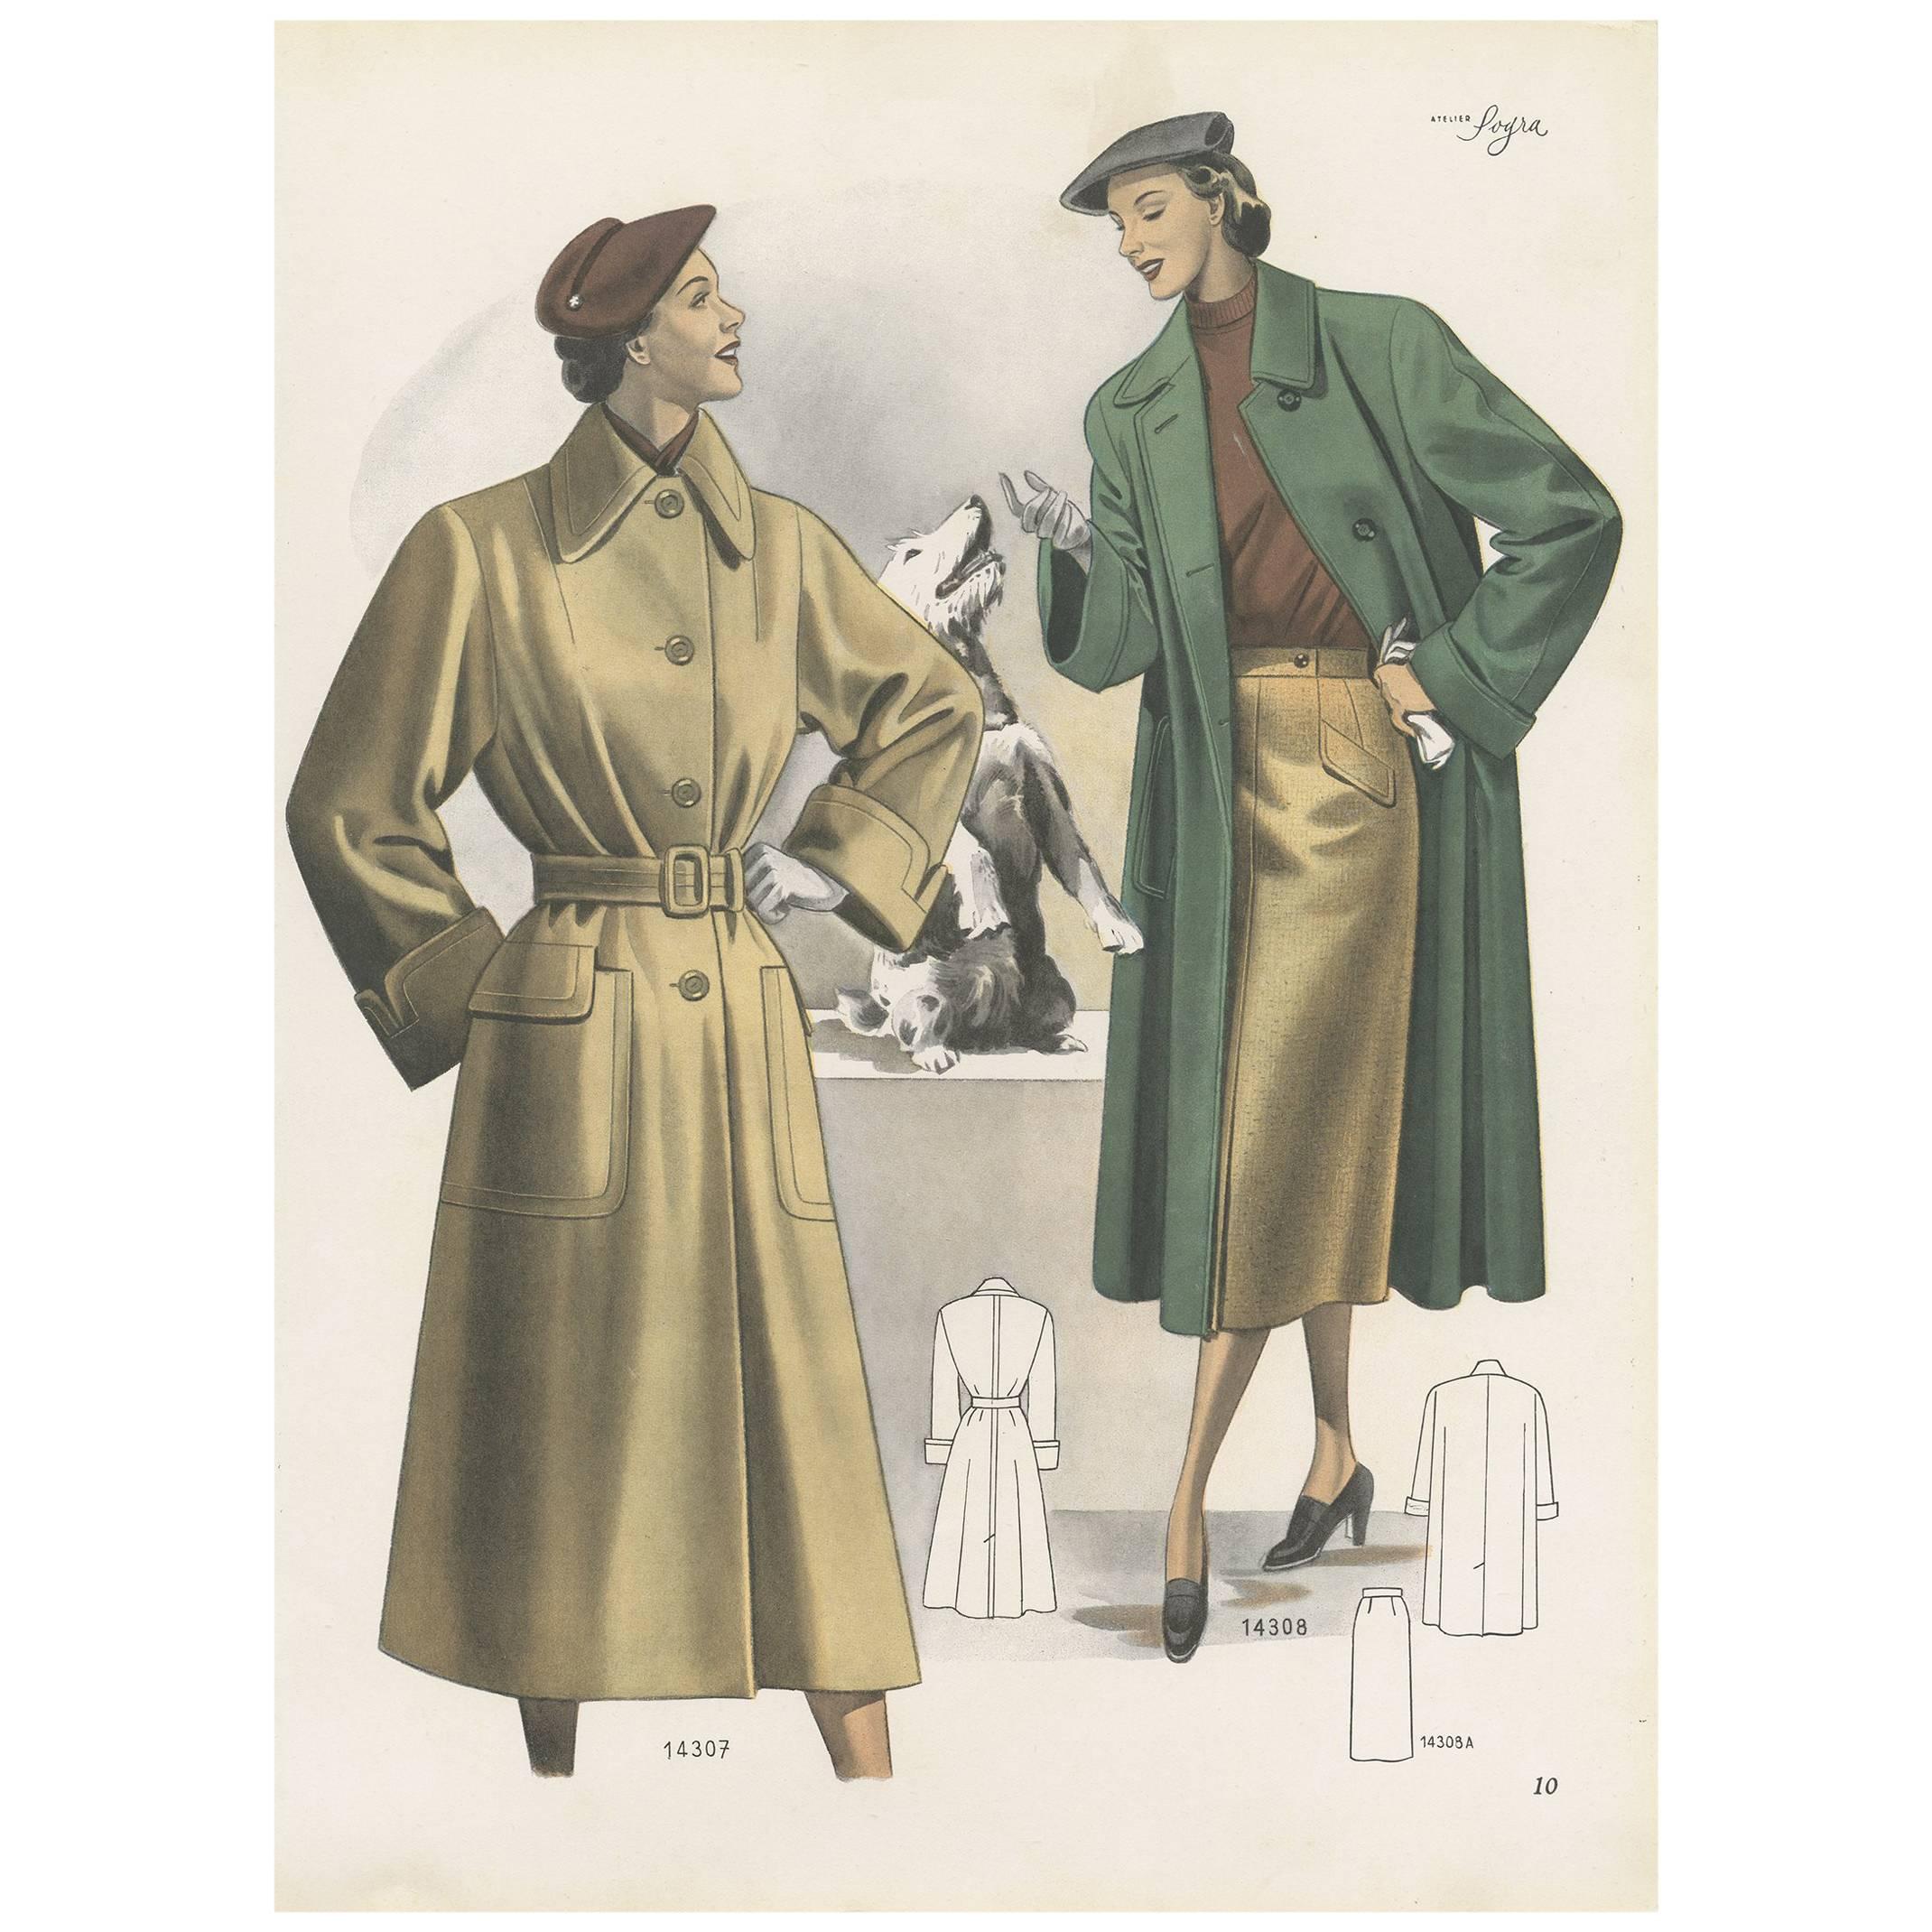 Vintage Fashion Print (Pl. 14307) published in Ladies Styles, 1952